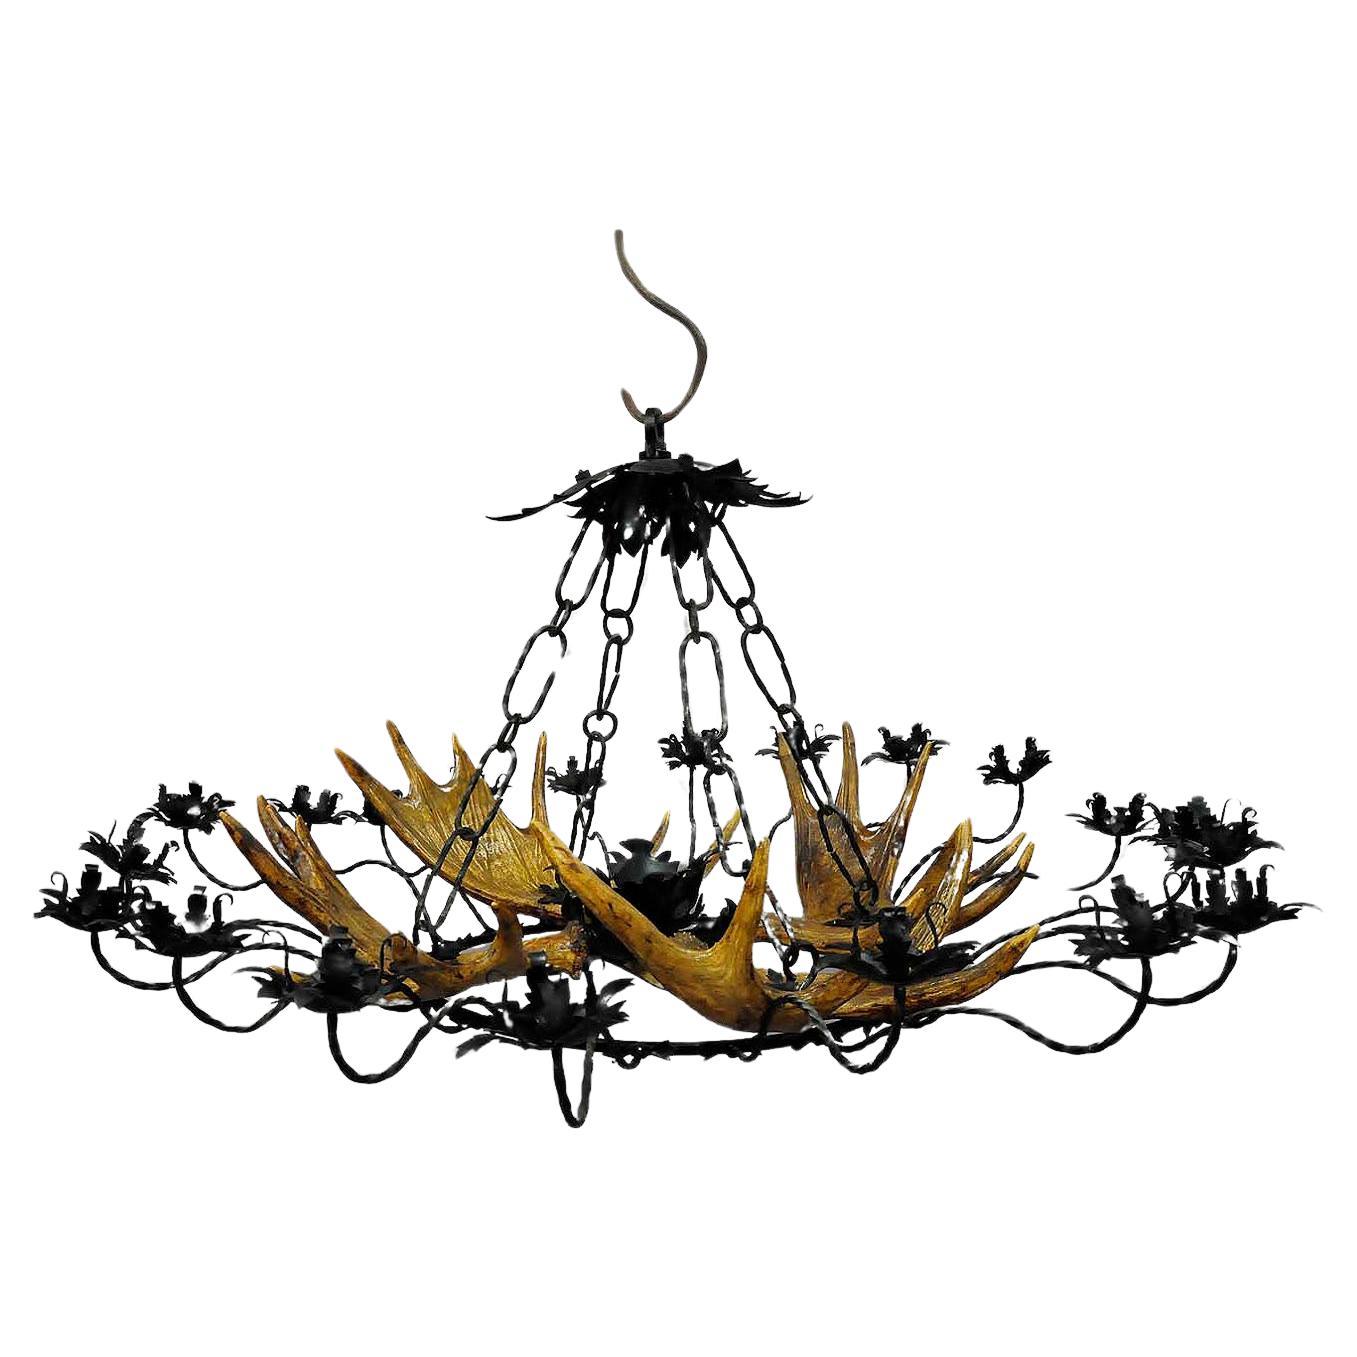 Vintage Antler Chandelier with Forged Iron Suspension